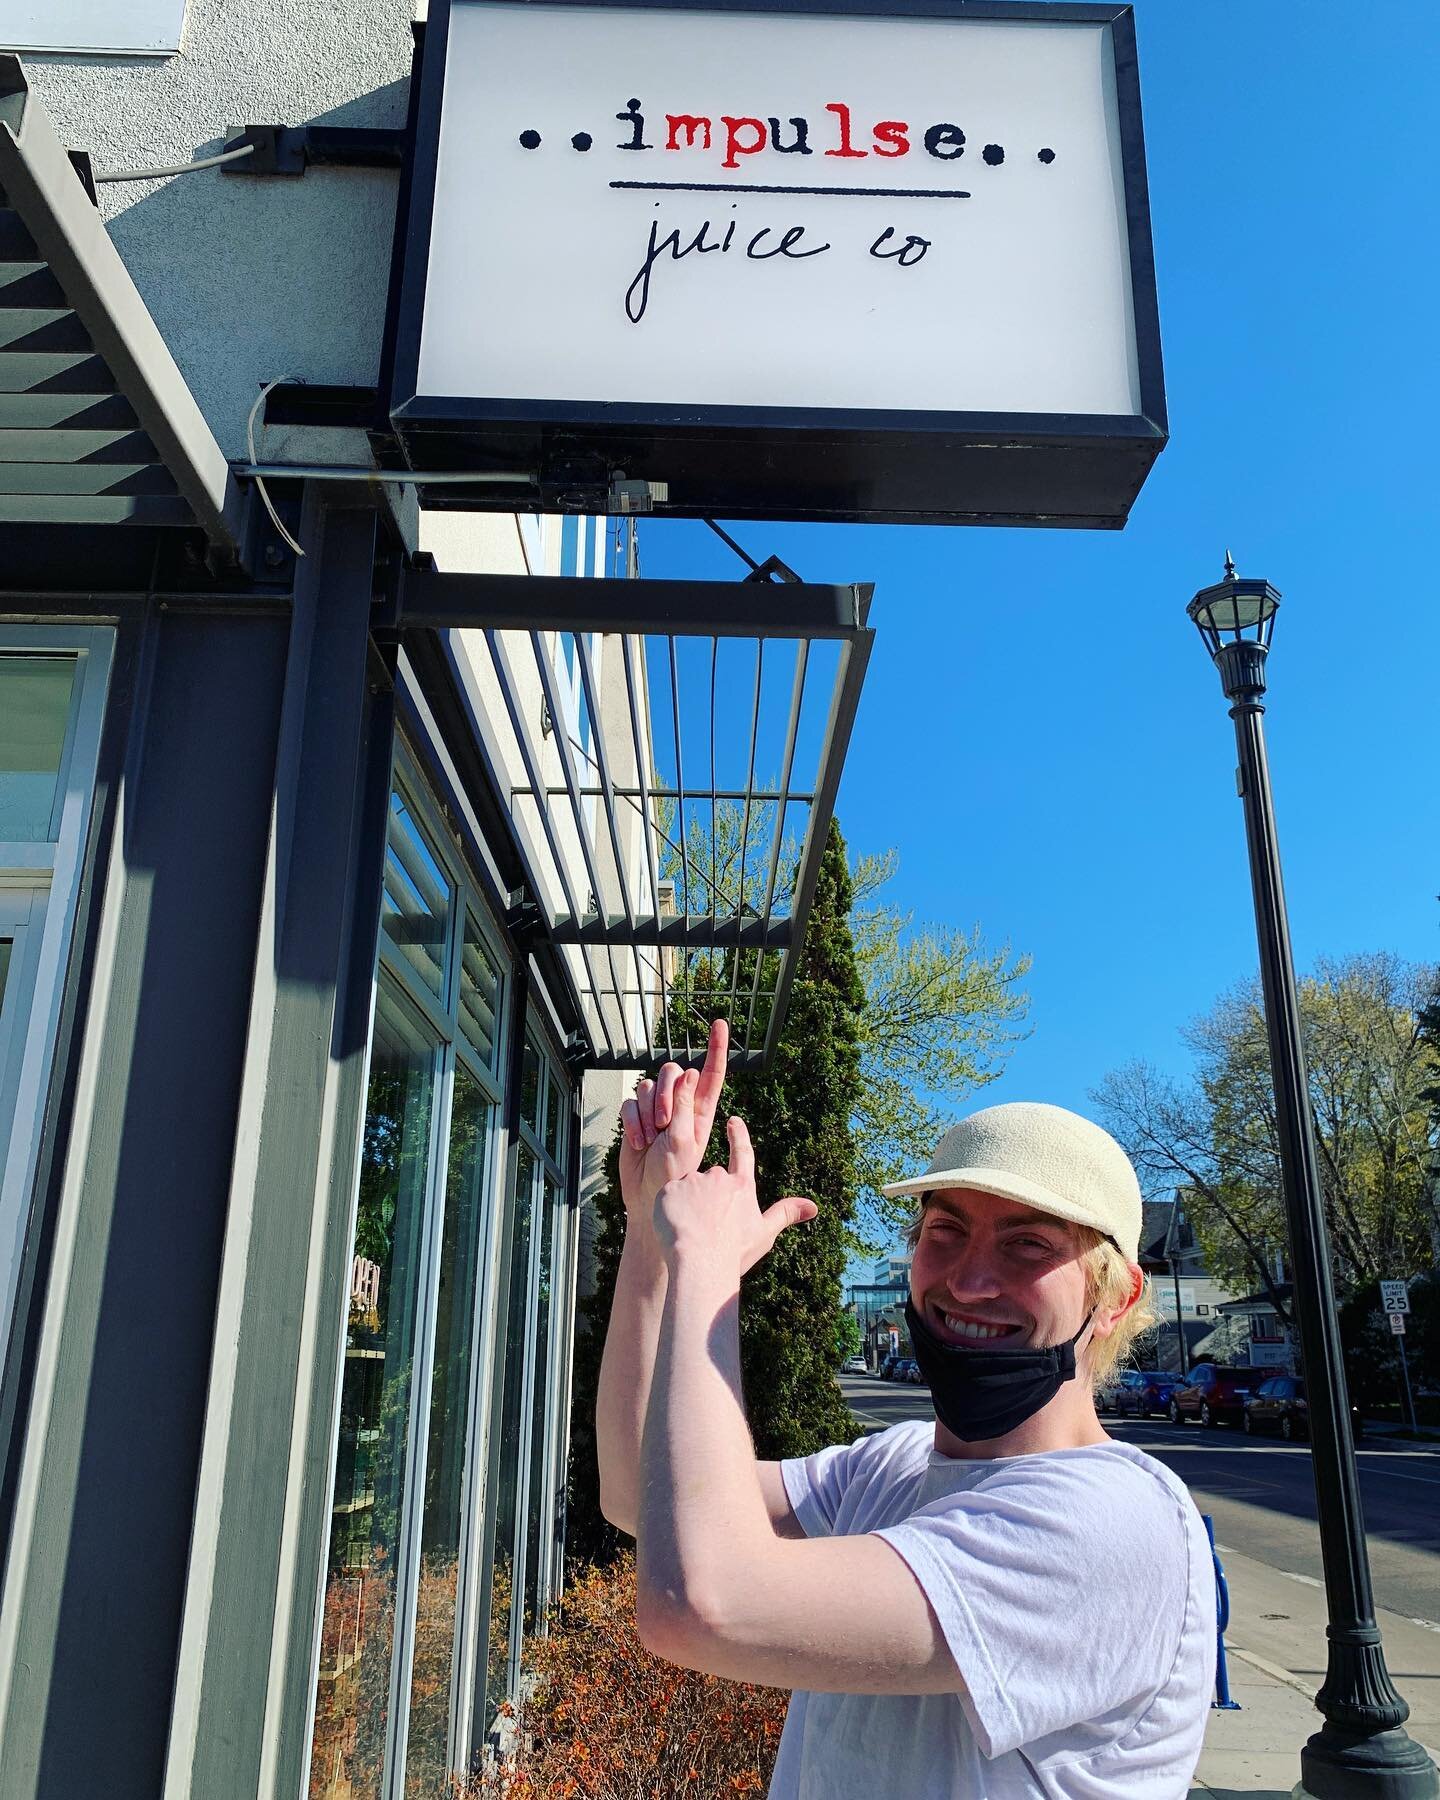 everybody knows and loves Cody! 

Cody was with Truce for 2+ years and recently returned in 2020

Half of the customers here in uptown know Cody well and vice versa!

fav menu items: goodhue &amp; the clover bowl topped with coconut, goji, nut butter